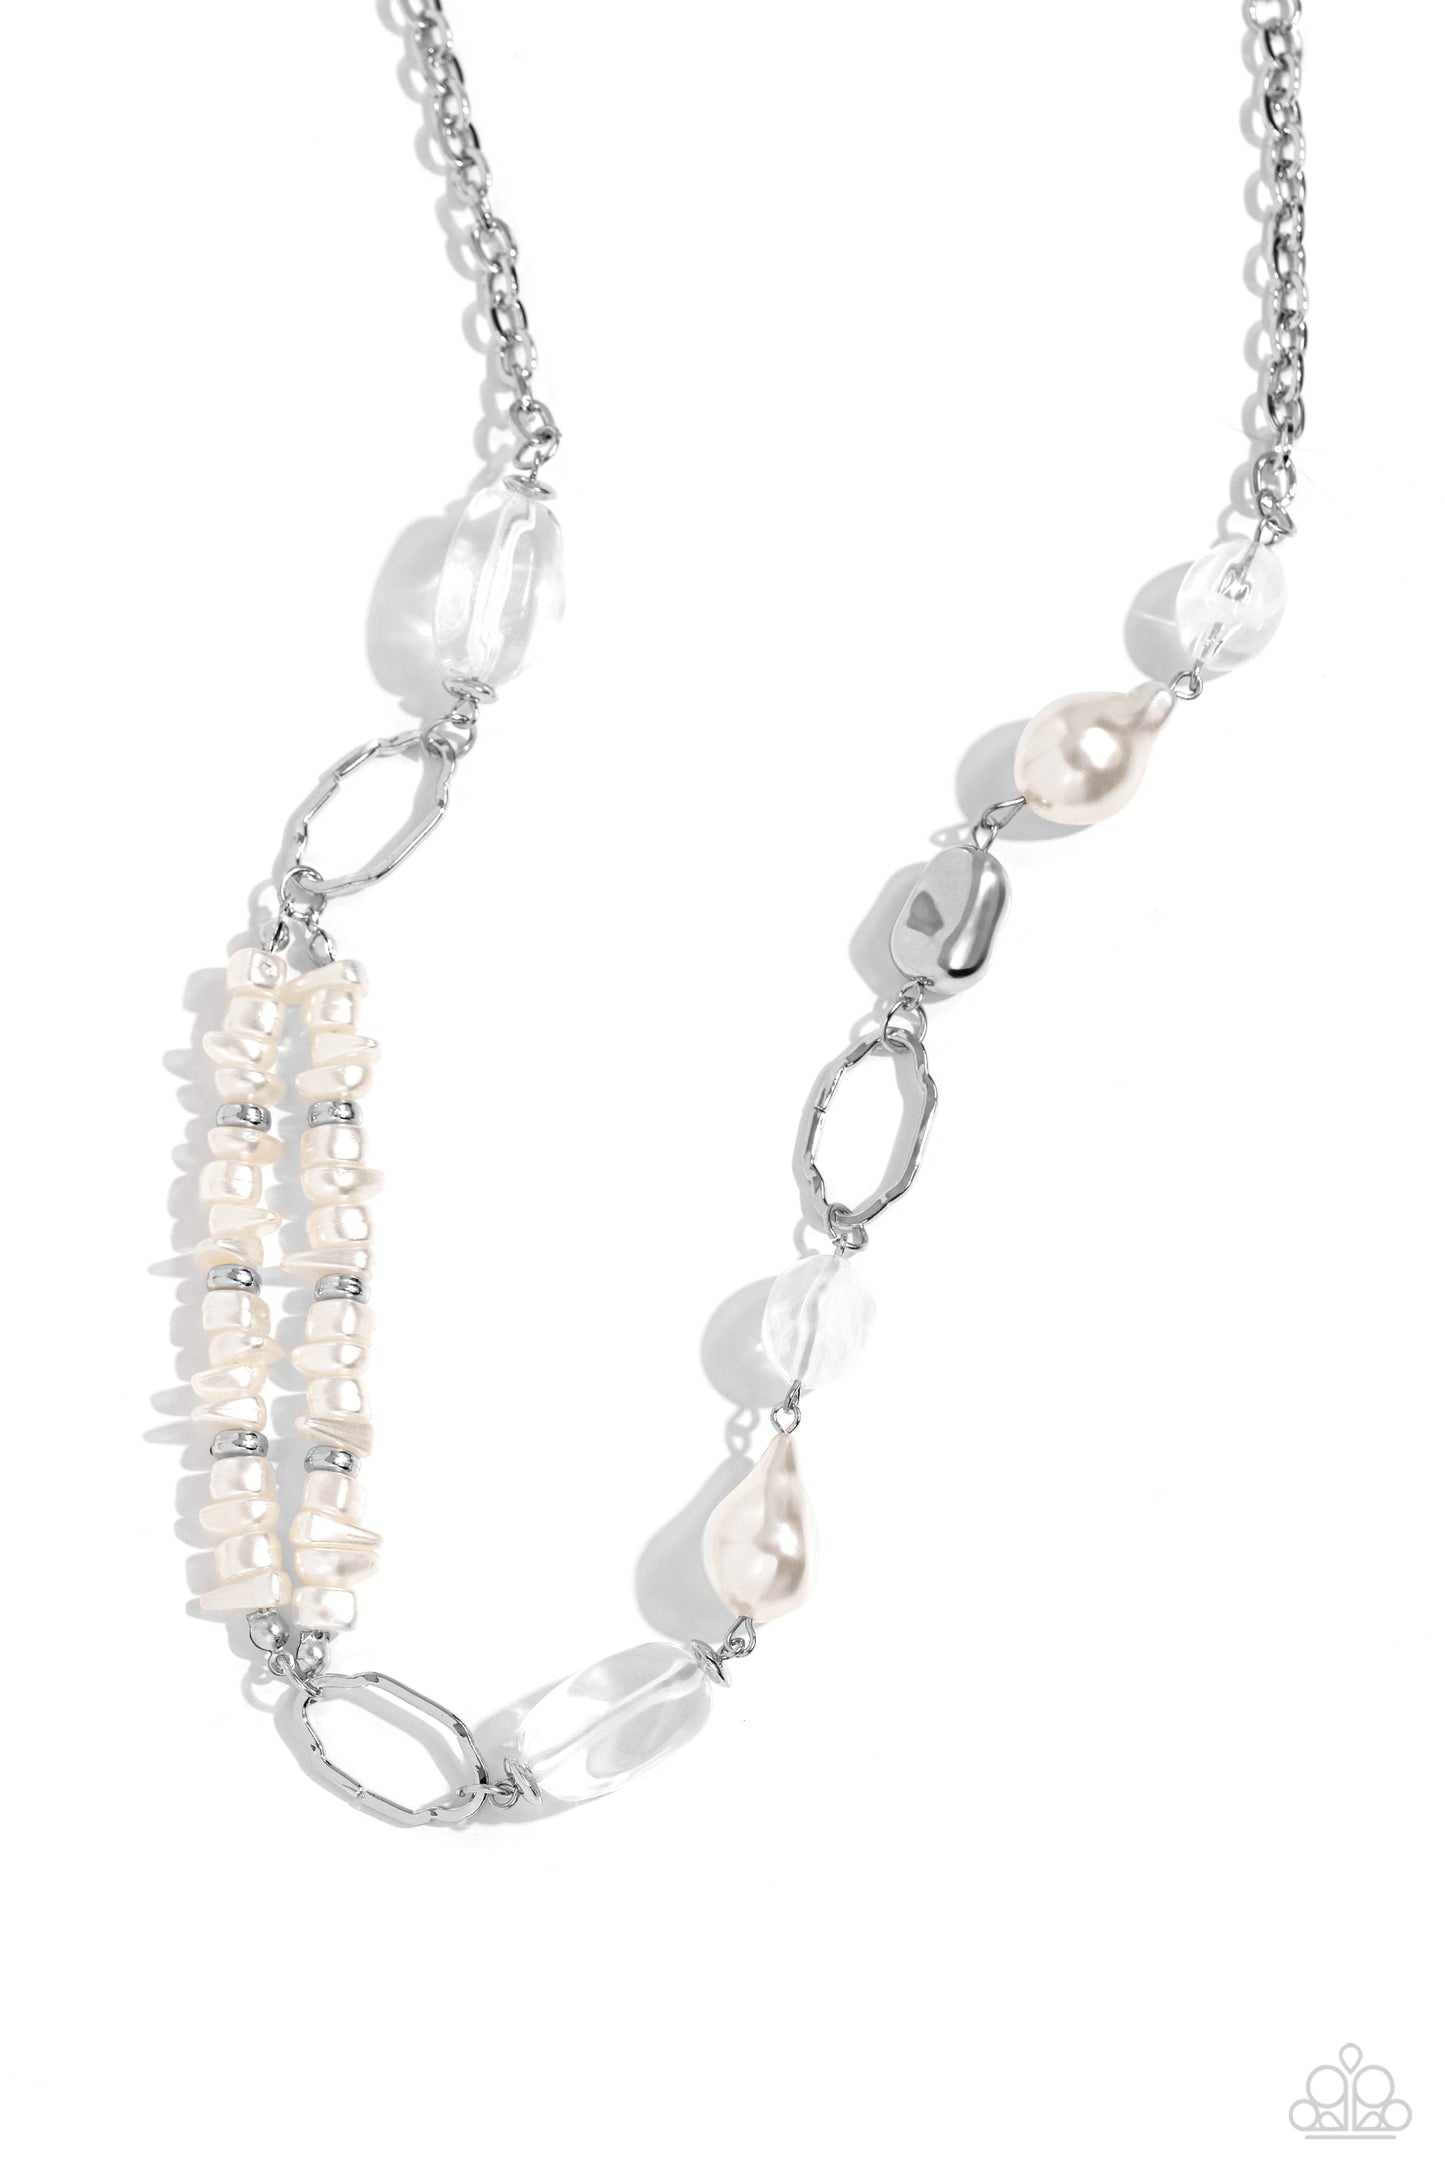 Easygoing Elegance - White Necklace